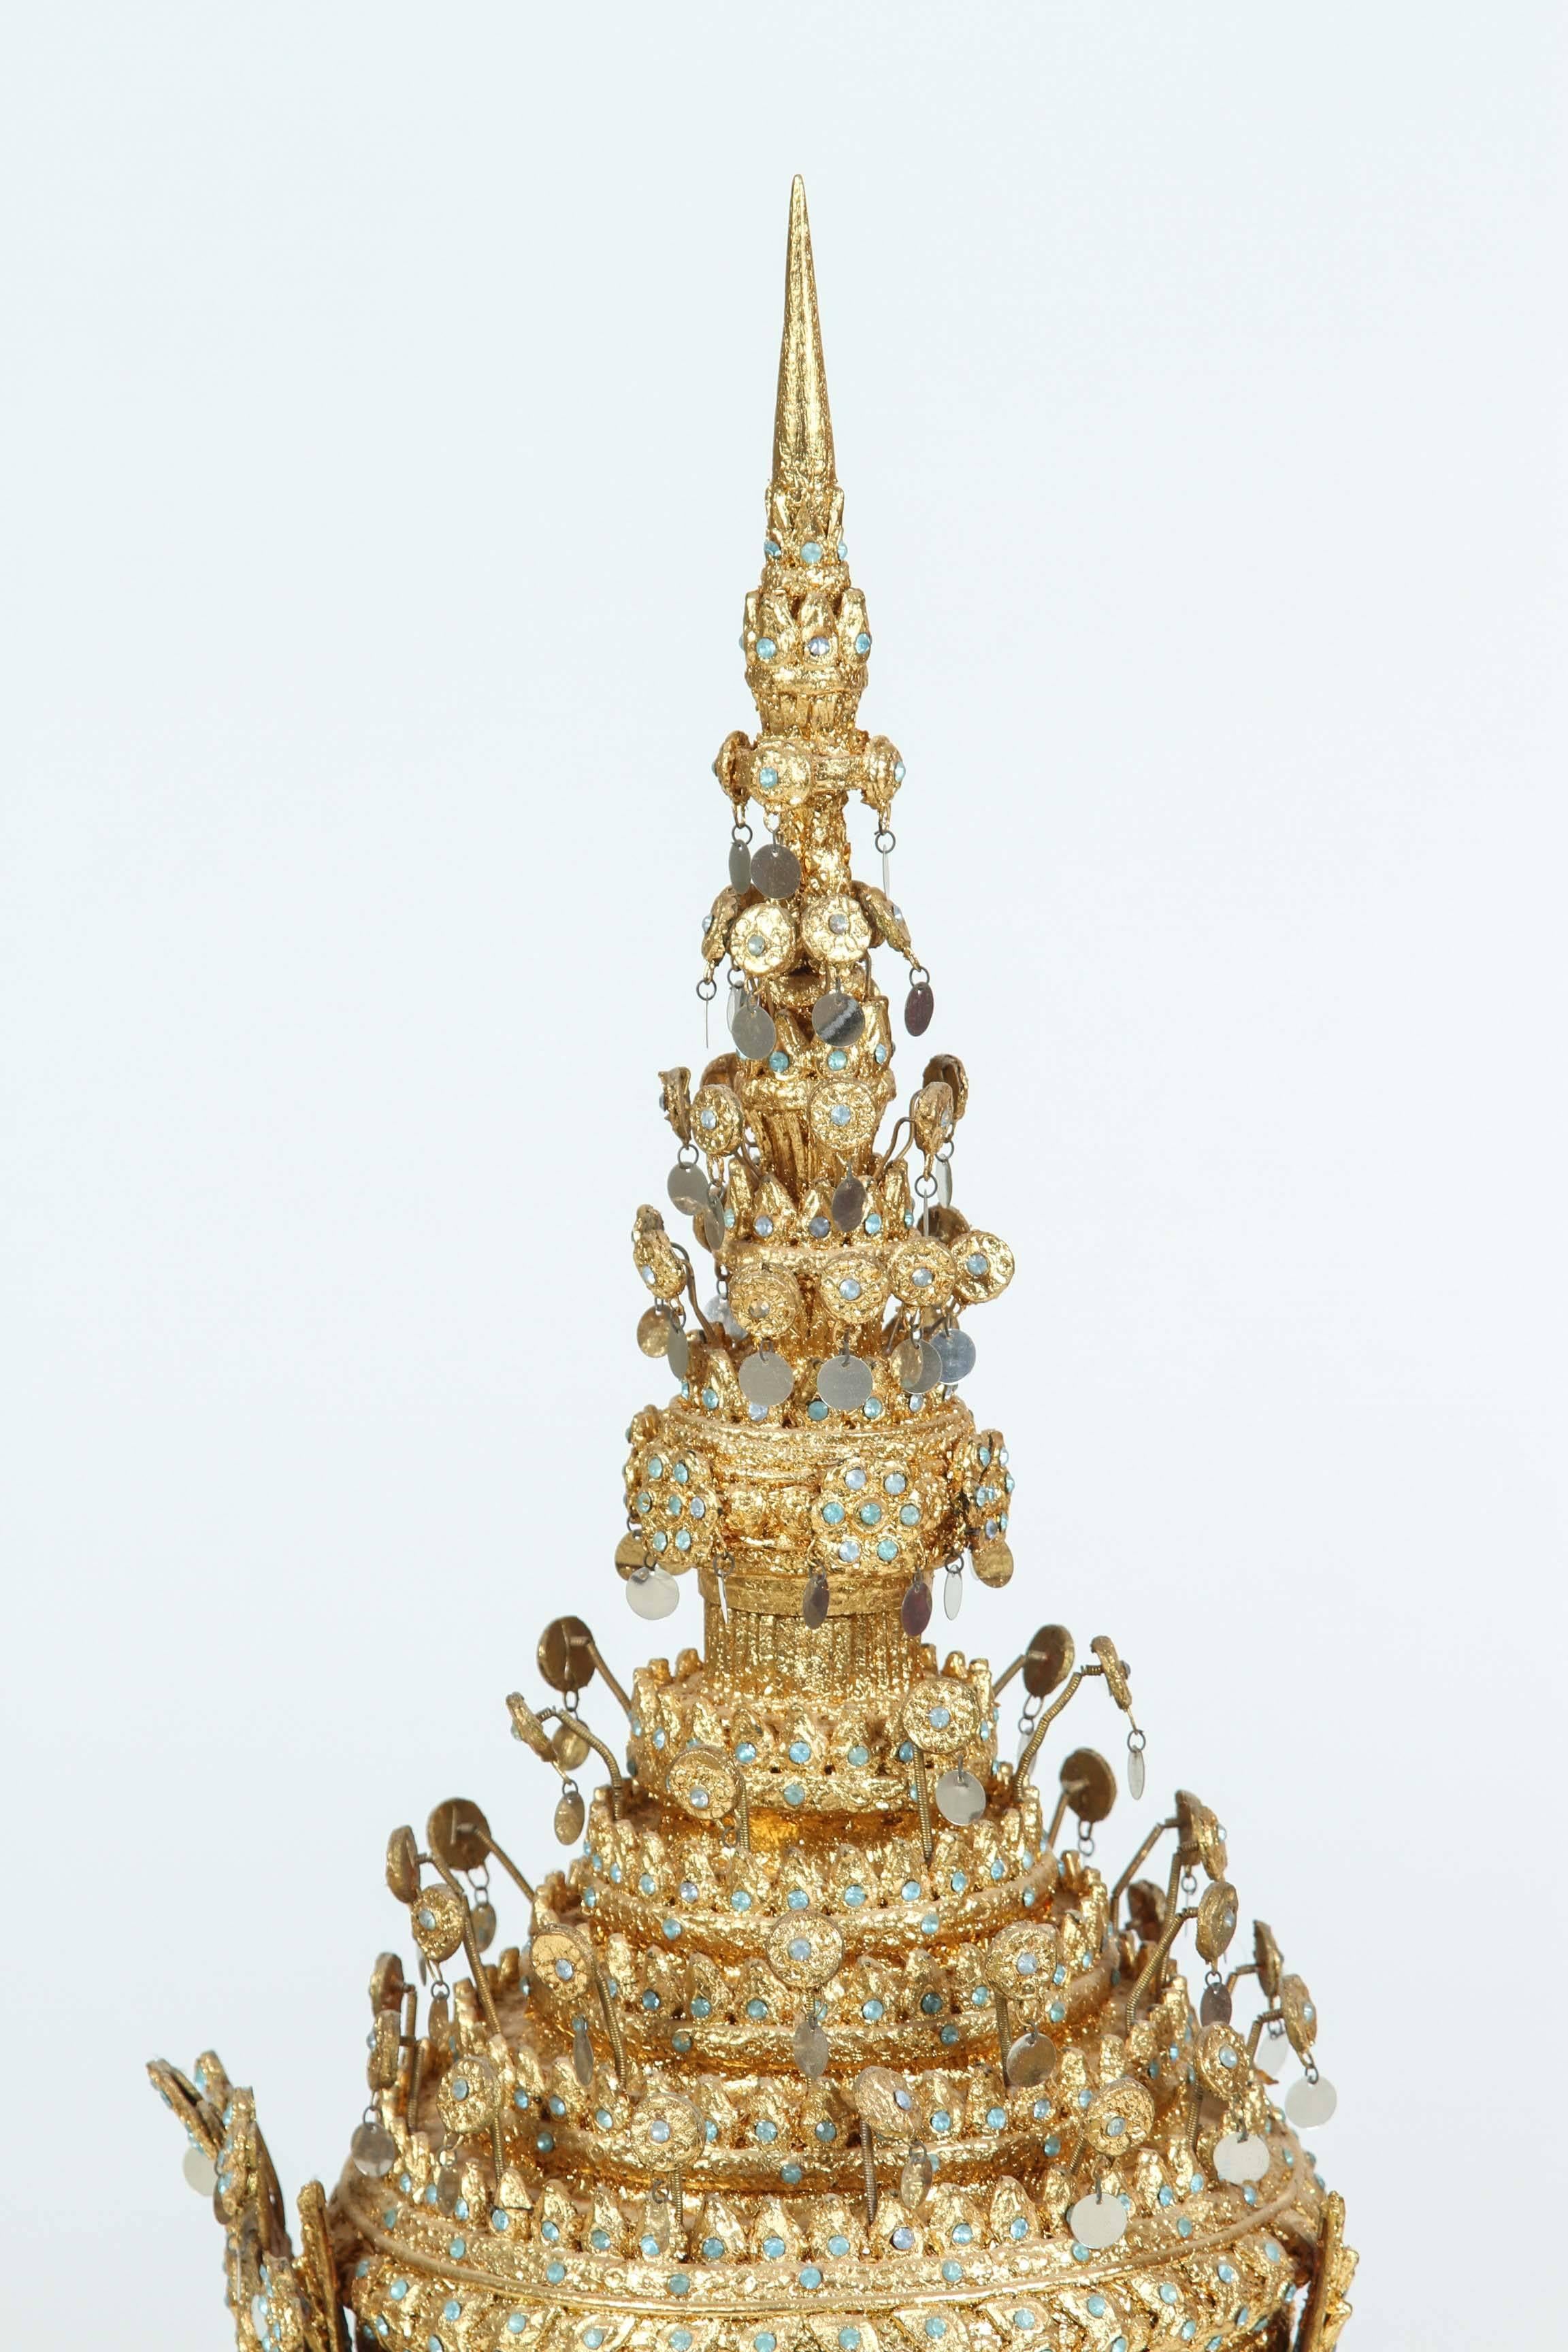 Ceremonial Thai headdress usually worn for wedding or religious ceremonies.
Gilt ceremonial headdress circa 20th century, hand-crafted in Thailand.
A traditionally modeled design with a conical metal spire at the top, in gilt papier mâché, metal